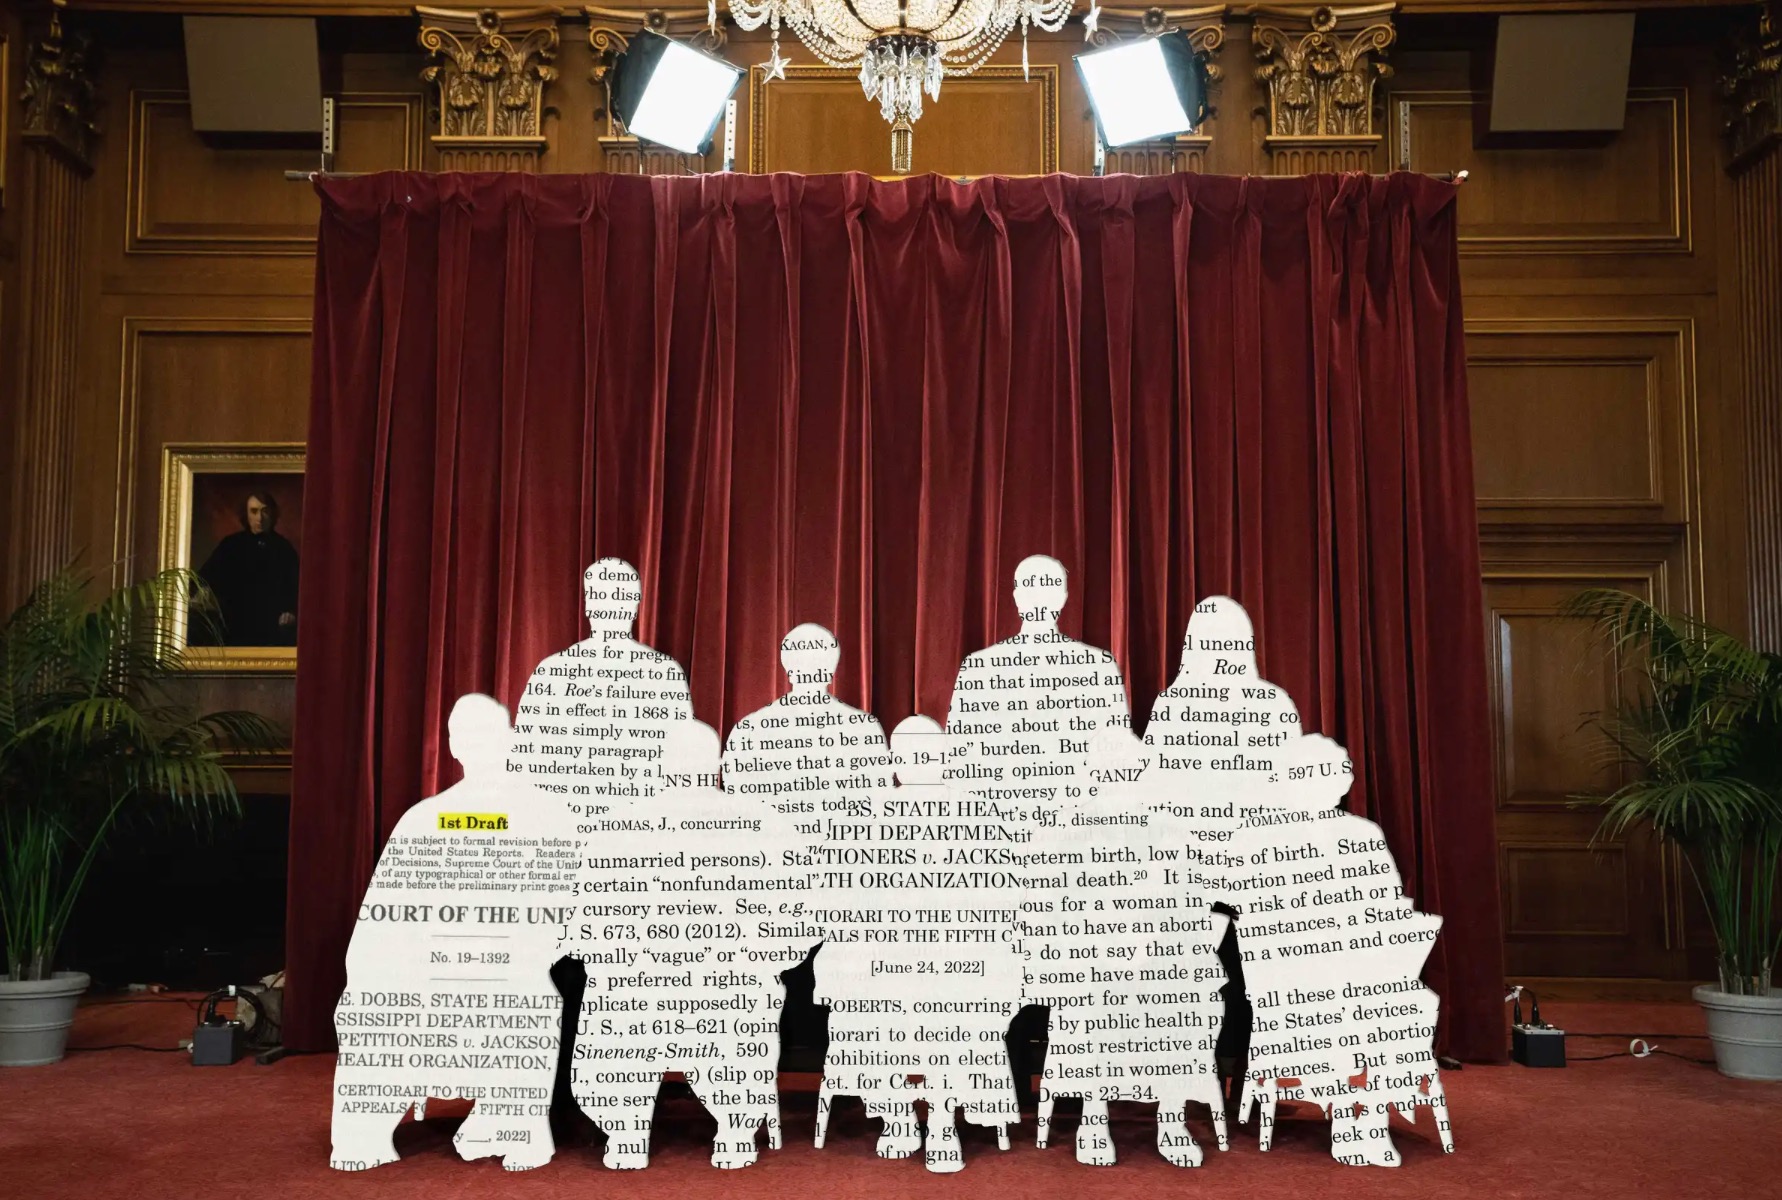 Illustration of SCOTUS justice outlined as text, credit NY Times